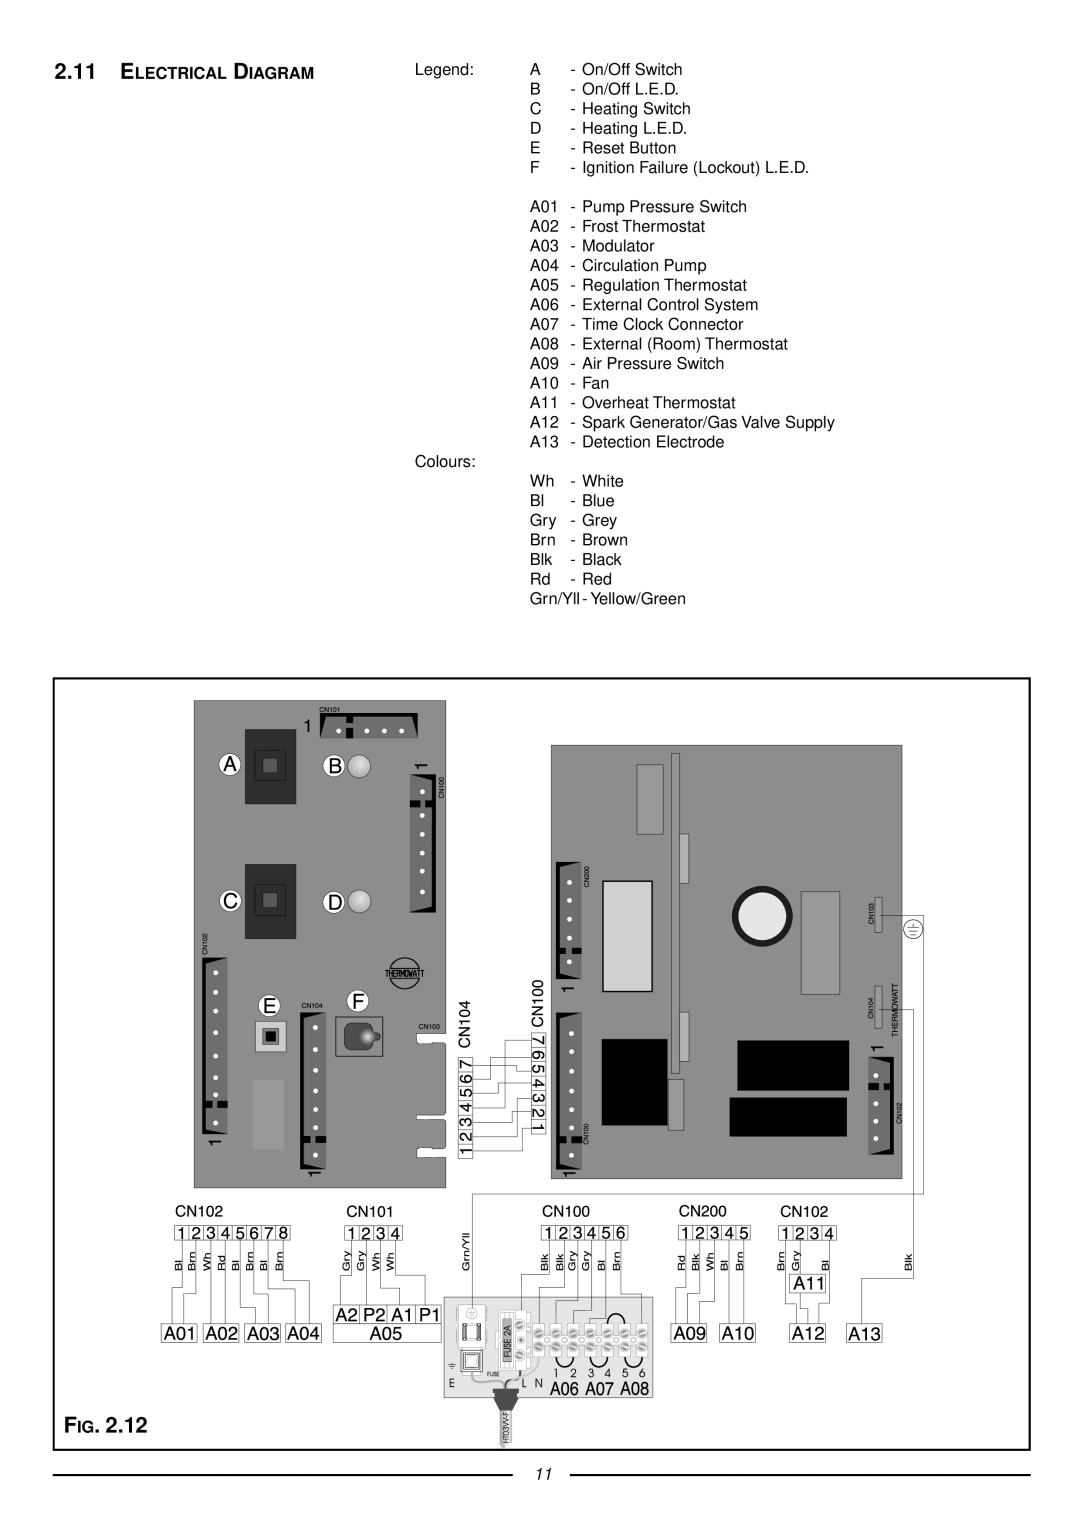 Ariston 41-116-05 installation instructions F Ig, Electrical Diagram, A - On/Off Switch, Spark Generator/Gas Valve Supply 